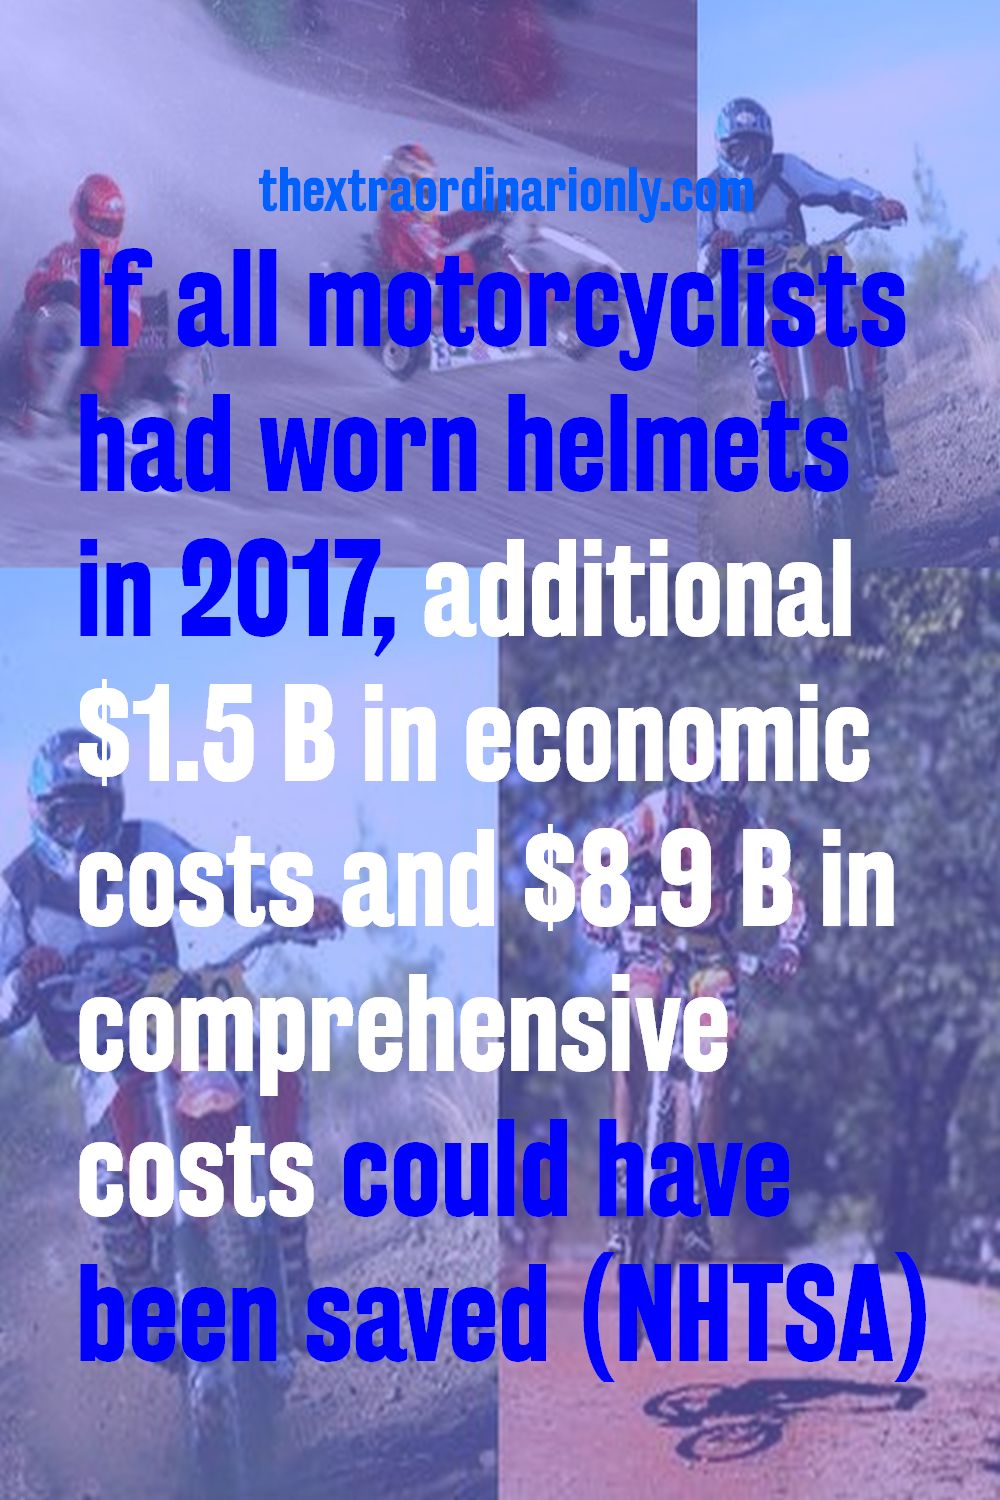 Additional $1.5 B in economic costs and $8.9 B in comprehensive costs could have been saved If all motorcyclists had worn helmets (2017)